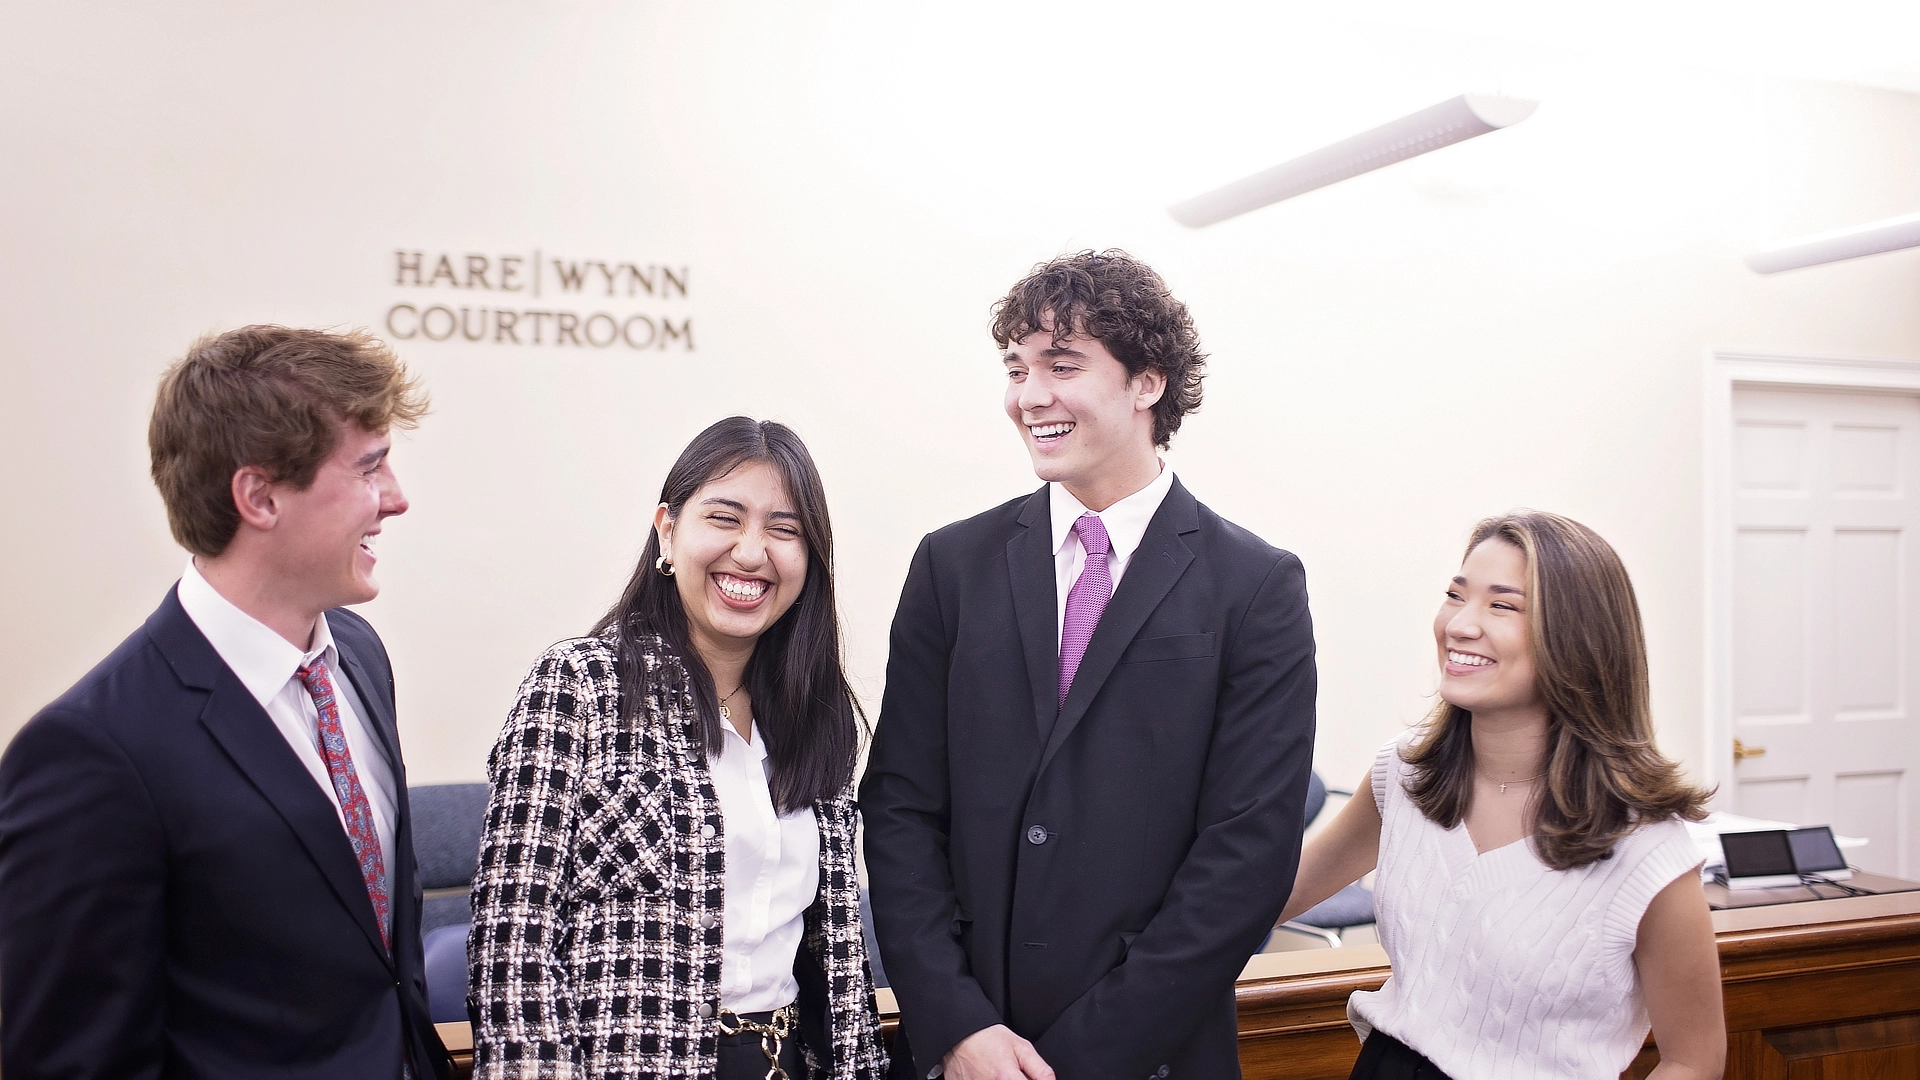 law students laughing together